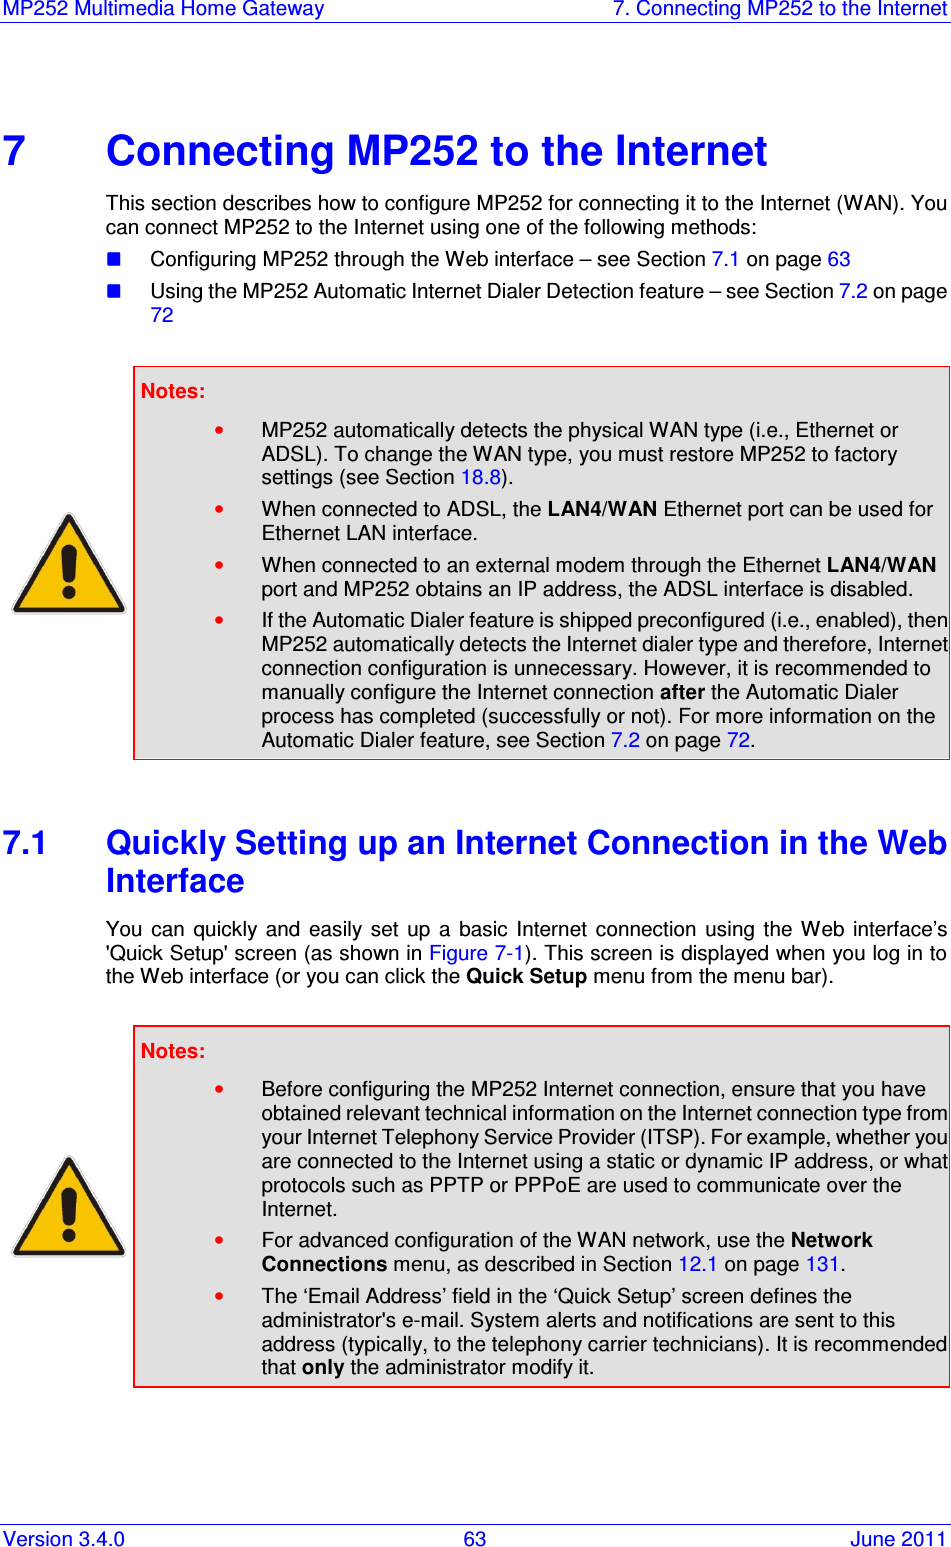 MP252 Multimedia Home Gateway  7. Connecting MP252 to the Internet Version 3.4.0  63  June 2011    7  Connecting MP252 to the Internet This section describes how to configure MP252 for connecting it to the Internet (WAN). You can connect MP252 to the Internet using one of the following methods:  Configuring MP252 through the Web interface – see Section 7.1 on page 63  Using the MP252 Automatic Internet Dialer Detection feature – see Section 7.2 on page 72   Notes:   • MP252 automatically detects the physical WAN type (i.e., Ethernet or ADSL). To change the WAN type, you must restore MP252 to factory settings (see Section 18.8). • When connected to ADSL, the LAN4/WAN Ethernet port can be used for Ethernet LAN interface.  • When connected to an external modem through the Ethernet LAN4/WAN port and MP252 obtains an IP address, the ADSL interface is disabled. • If the Automatic Dialer feature is shipped preconfigured (i.e., enabled), then MP252 automatically detects the Internet dialer type and therefore, Internet connection configuration is unnecessary. However, it is recommended to manually configure the Internet connection after the Automatic Dialer process has completed (successfully or not). For more information on the Automatic Dialer feature, see Section 7.2 on page 72.  7.1  Quickly Setting up an Internet Connection in the Web Interface You  can  quickly  and  easily  set  up  a  basic  Internet  connection  using  the Web  interface’s &apos;Quick Setup&apos; screen (as shown in Figure 7-1). This screen is displayed when you log in to the Web interface (or you can click the Quick Setup menu from the menu bar).   Notes:   • Before configuring the MP252 Internet connection, ensure that you have obtained relevant technical information on the Internet connection type from your Internet Telephony Service Provider (ITSP). For example, whether you are connected to the Internet using a static or dynamic IP address, or what protocols such as PPTP or PPPoE are used to communicate over the Internet. • For advanced configuration of the WAN network, use the Network Connections menu, as described in Section 12.1 on page 131. • The ‘Email Address’ field in the ‘Quick Setup’ screen defines the administrator&apos;s e-mail. System alerts and notifications are sent to this address (typically, to the telephony carrier technicians). It is recommended that only the administrator modify it.  